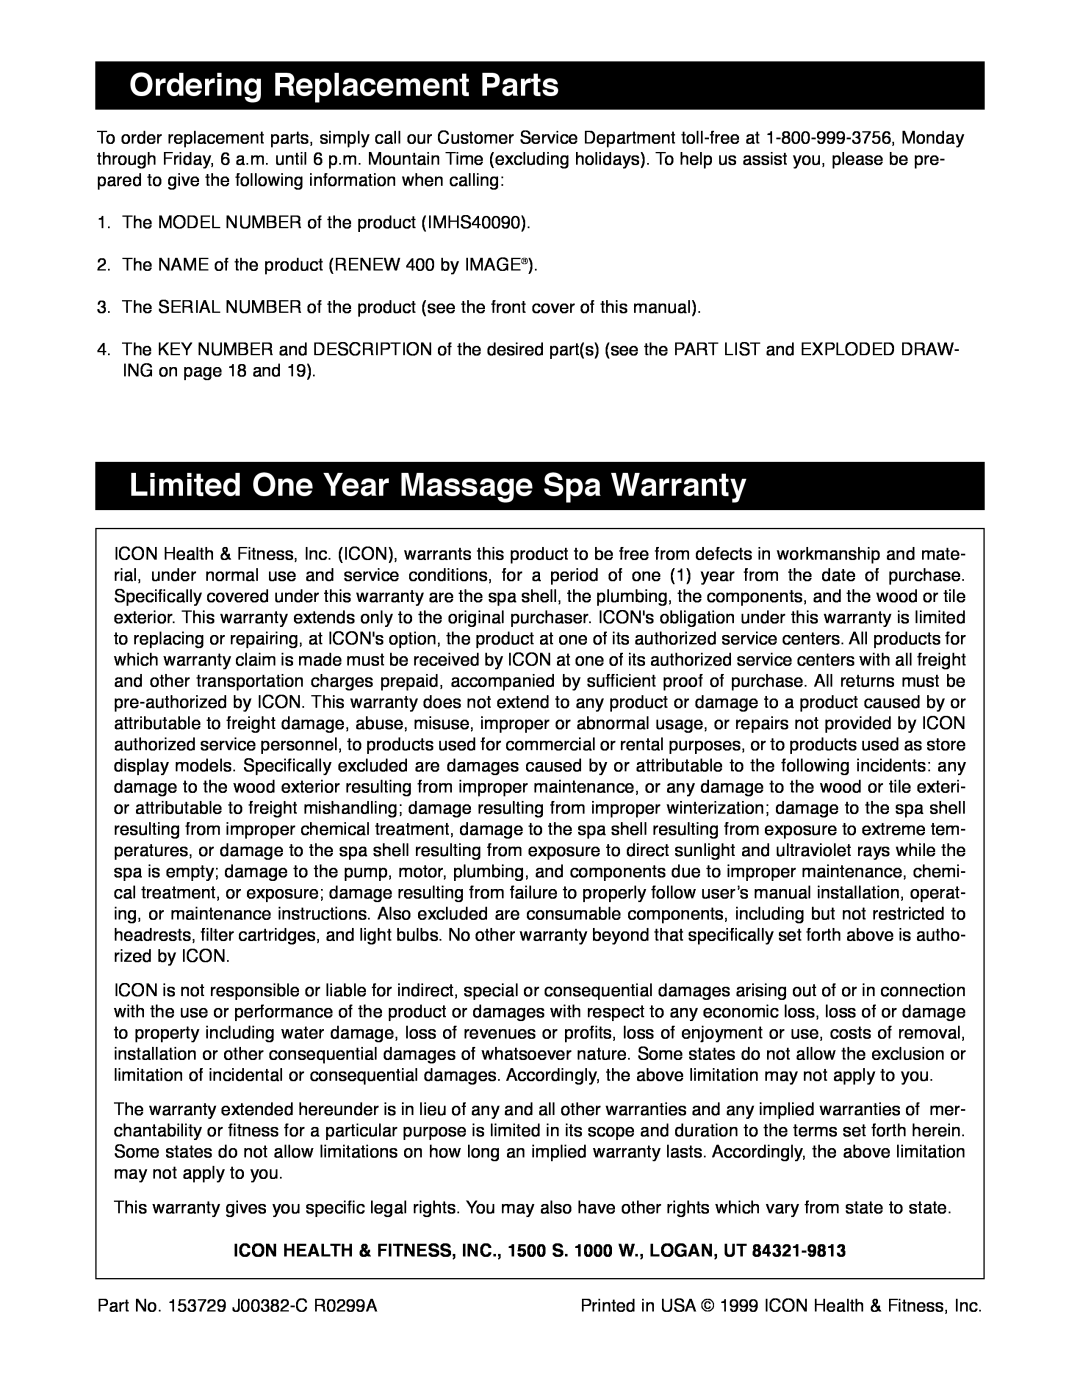 Image IMHS40090 manual Ordering Replacement Parts, Limited One Year Massage Spa Warranty 